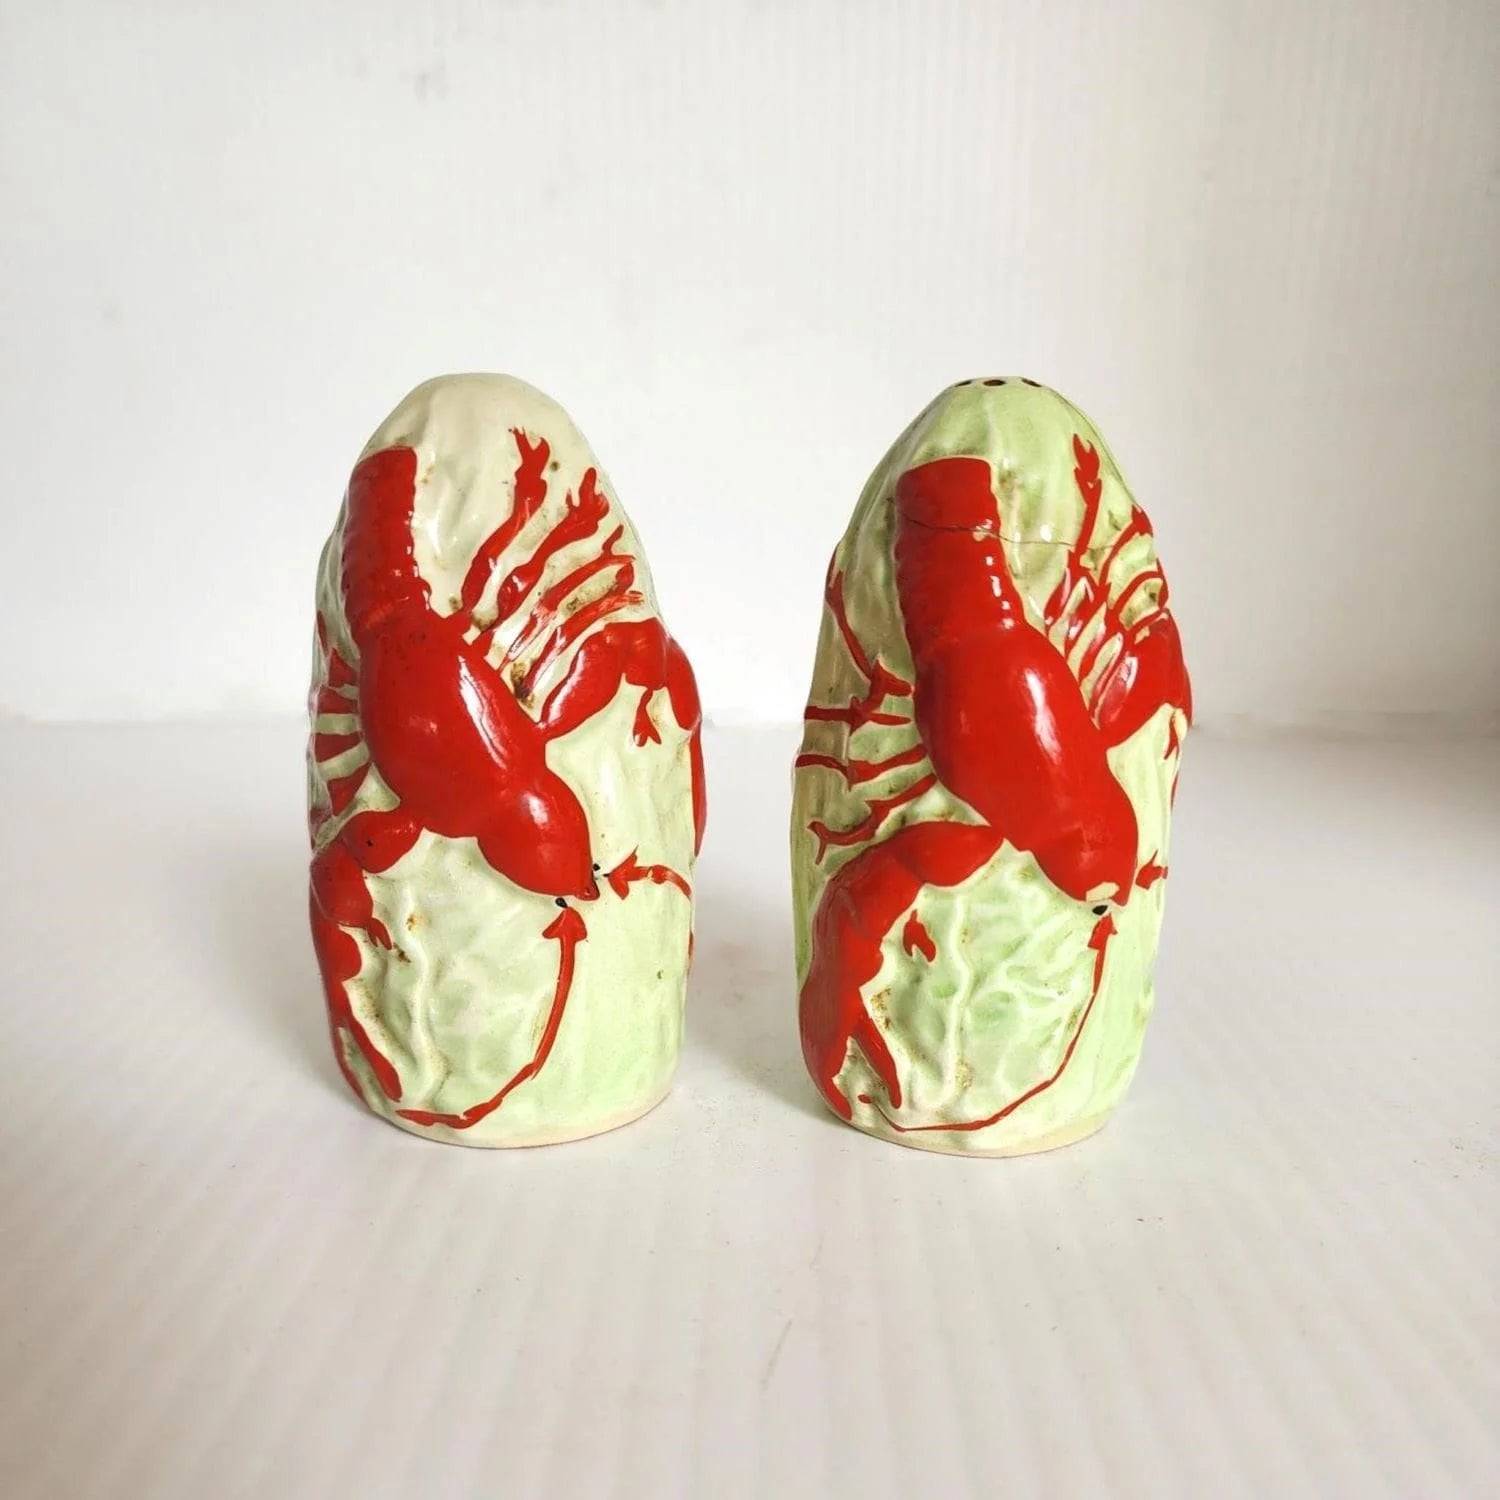 Two ceramic lobster salt and pepper shakers on a table.